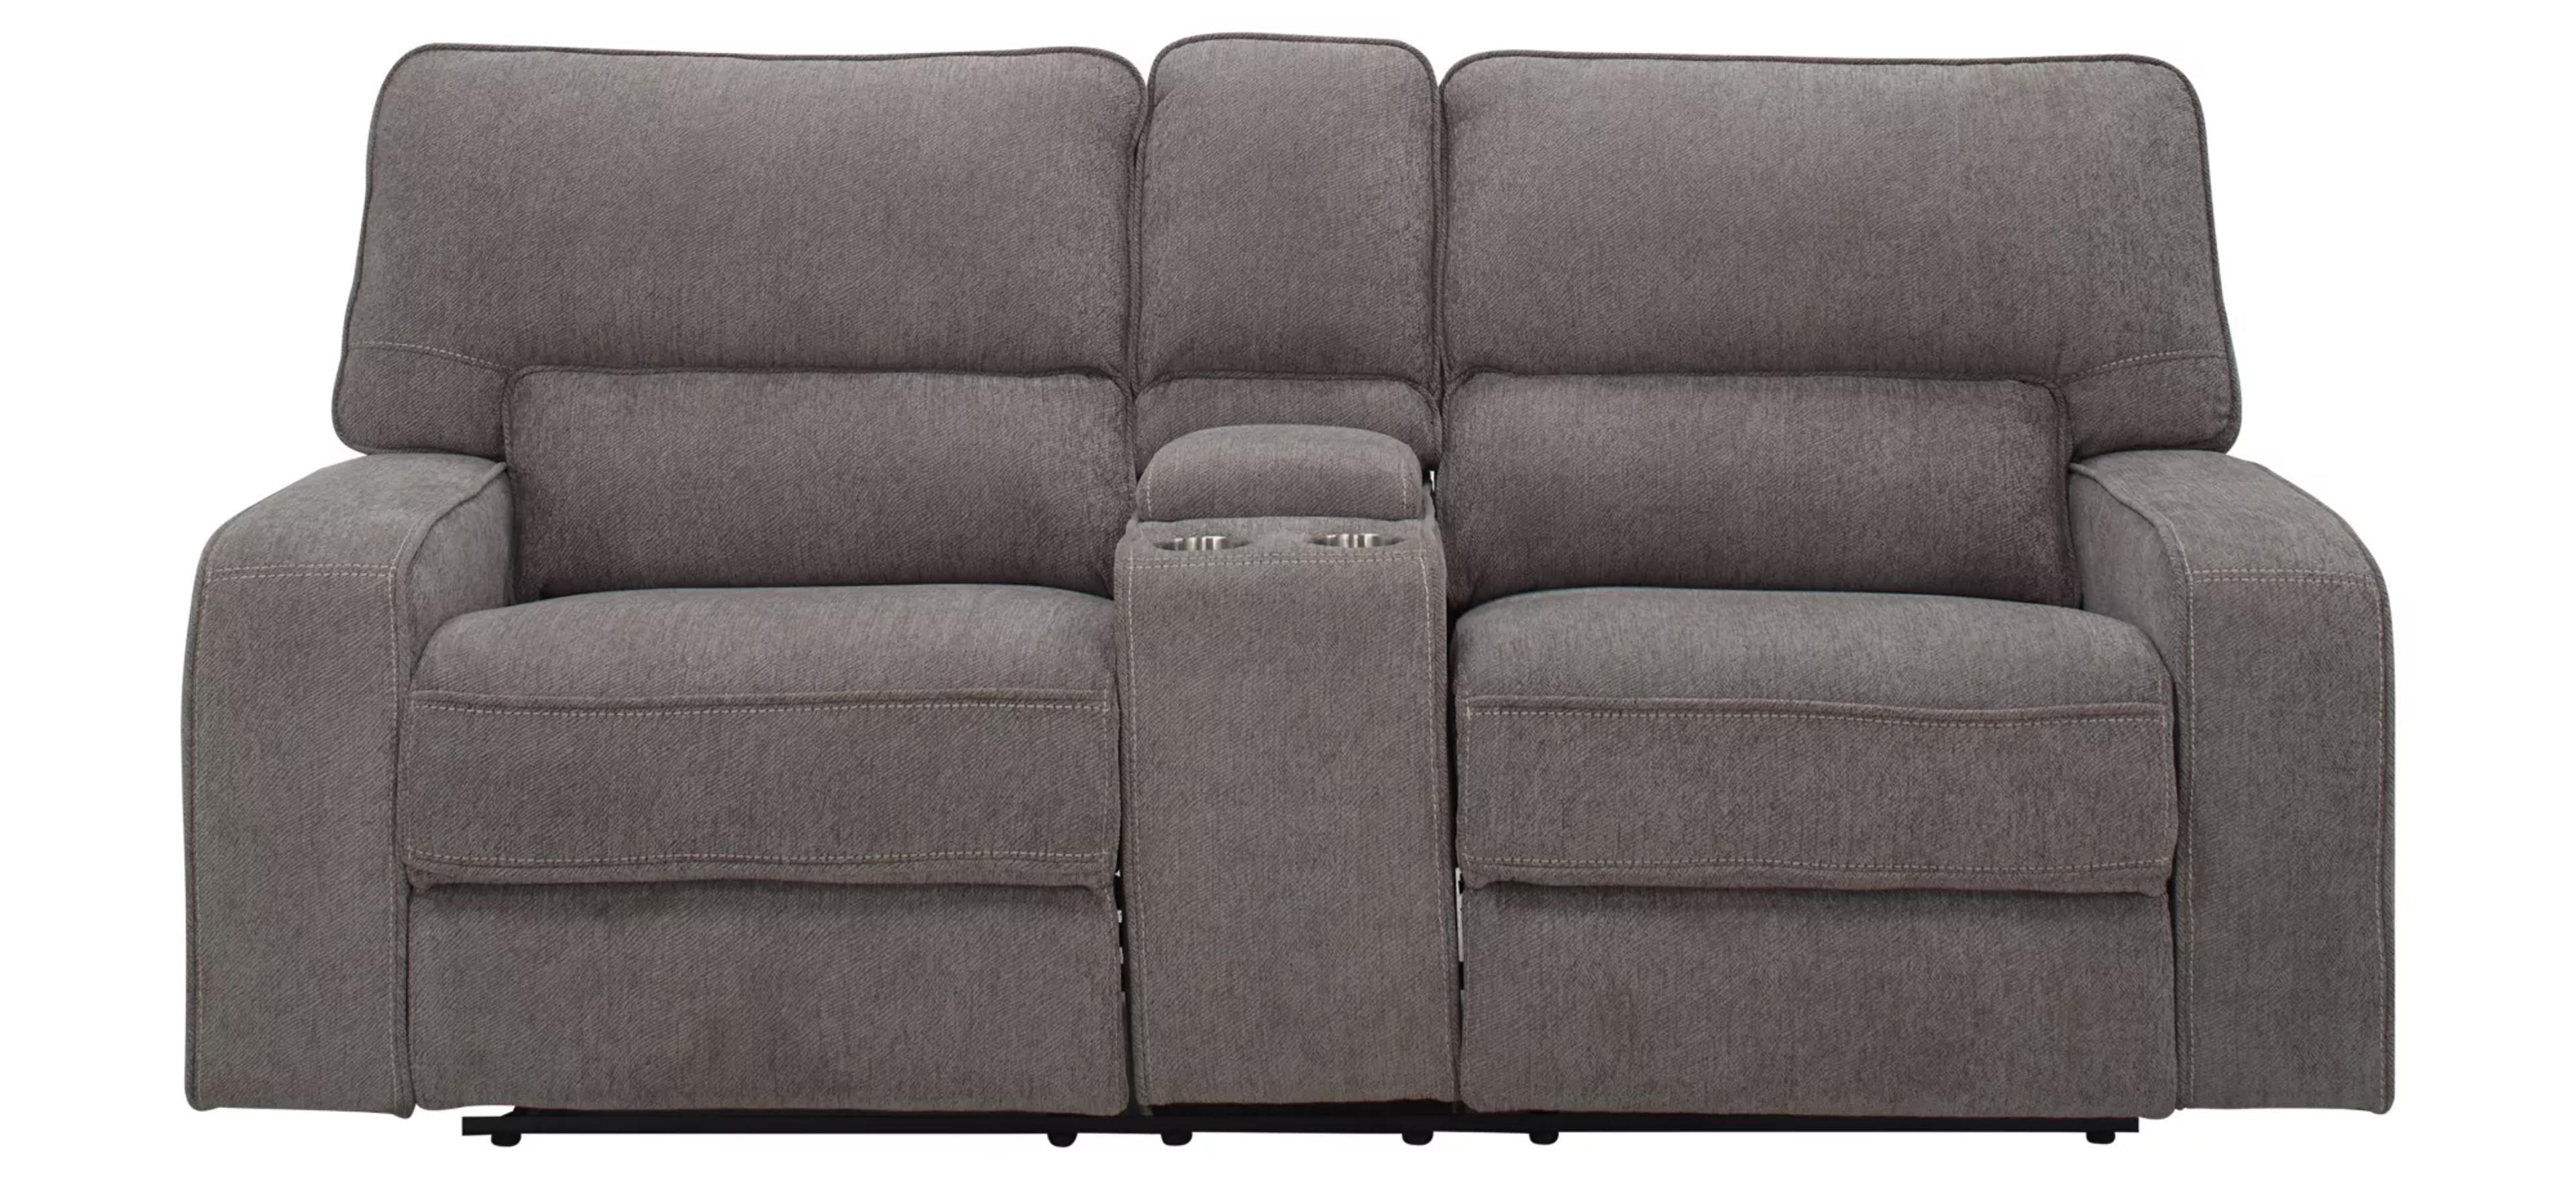 Duvall Chenille Reclining Console Loveseat | Raymour & Flanigan